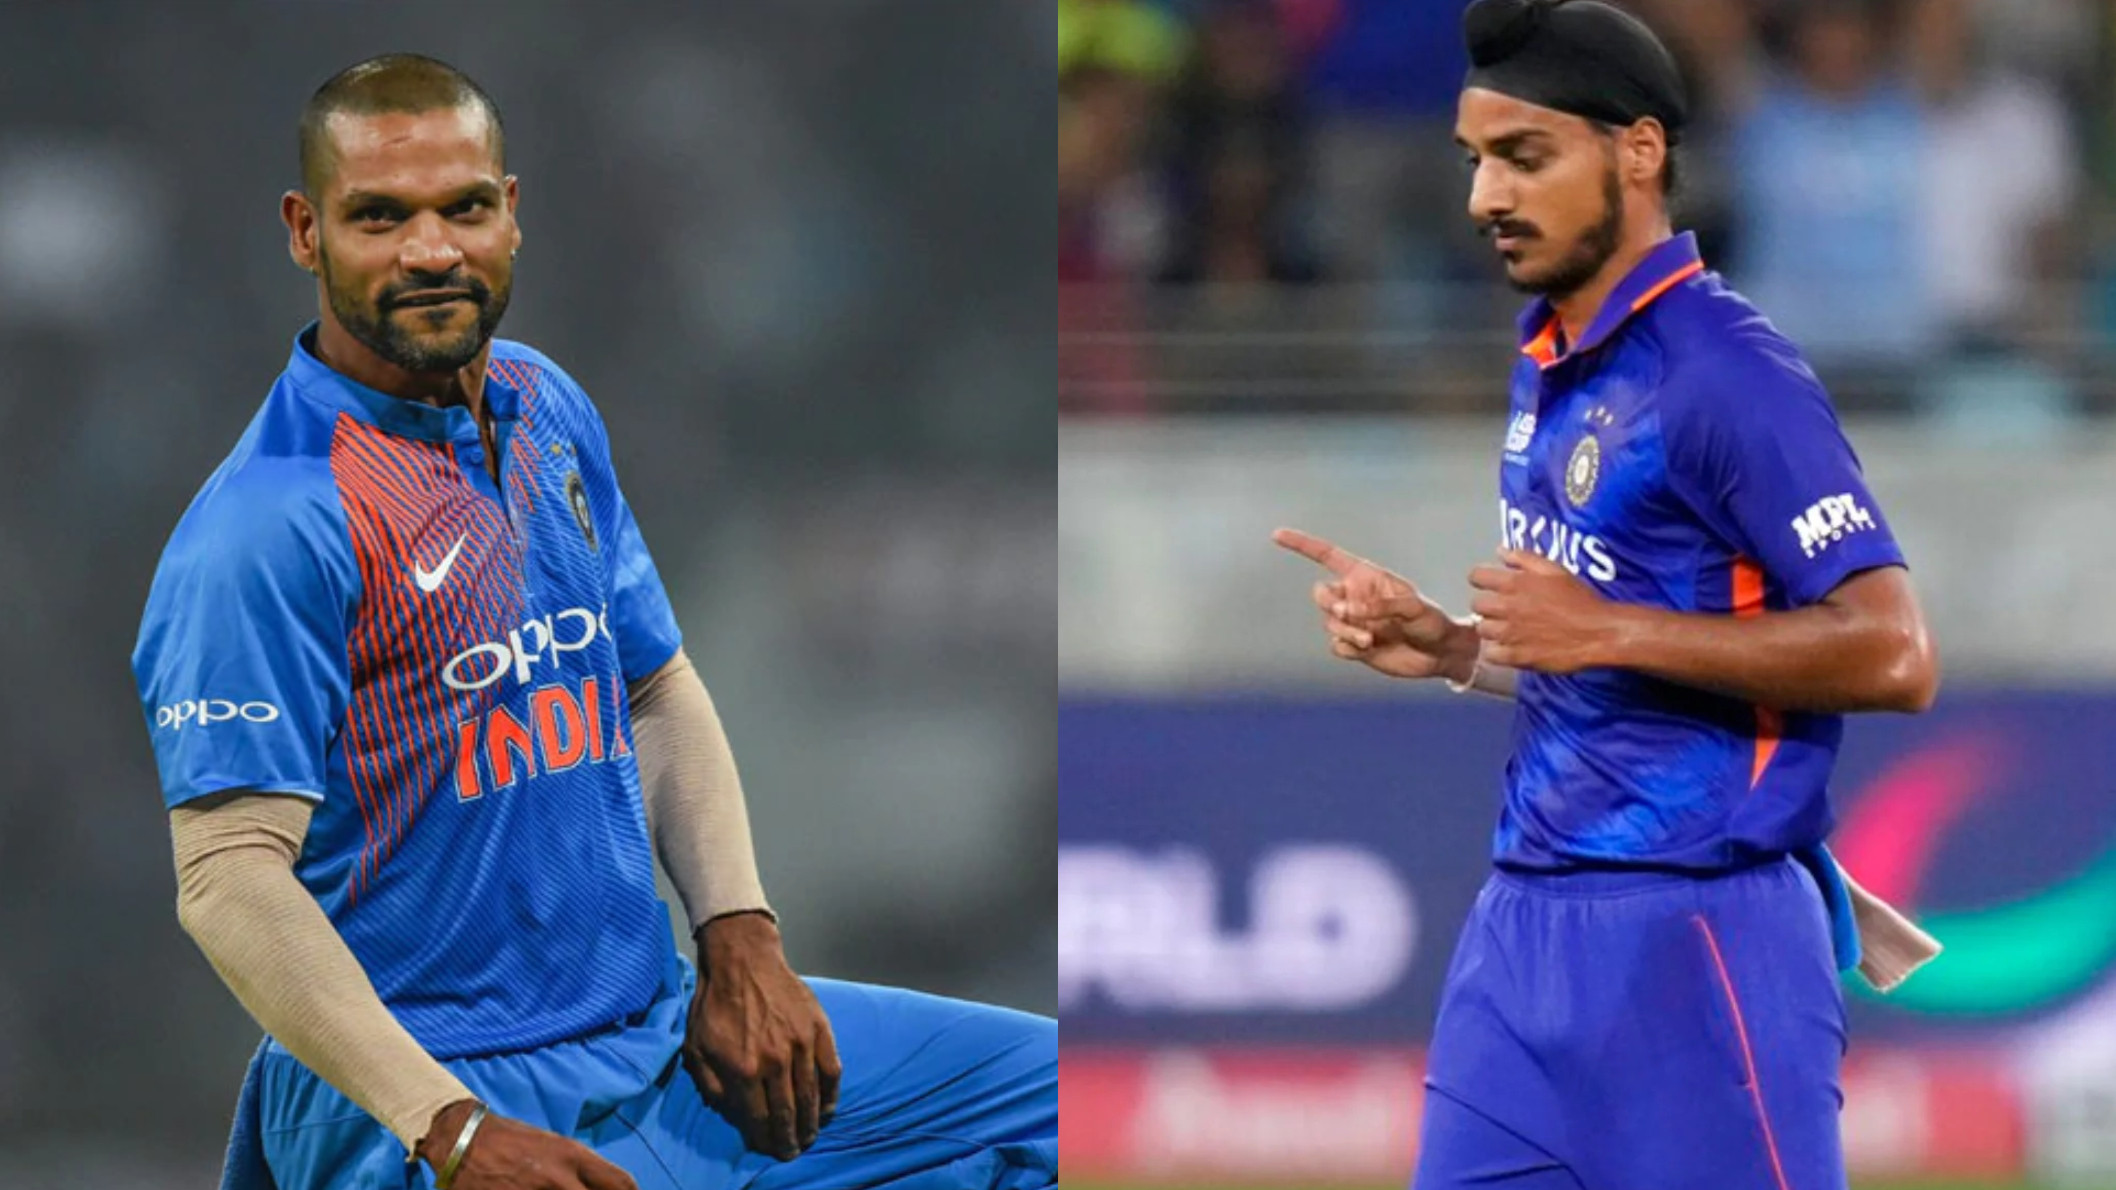 Asia Cup 2022: ‘One catch does not define a player’s role’- Shikhar Dhawan defends Arshdeep Singh